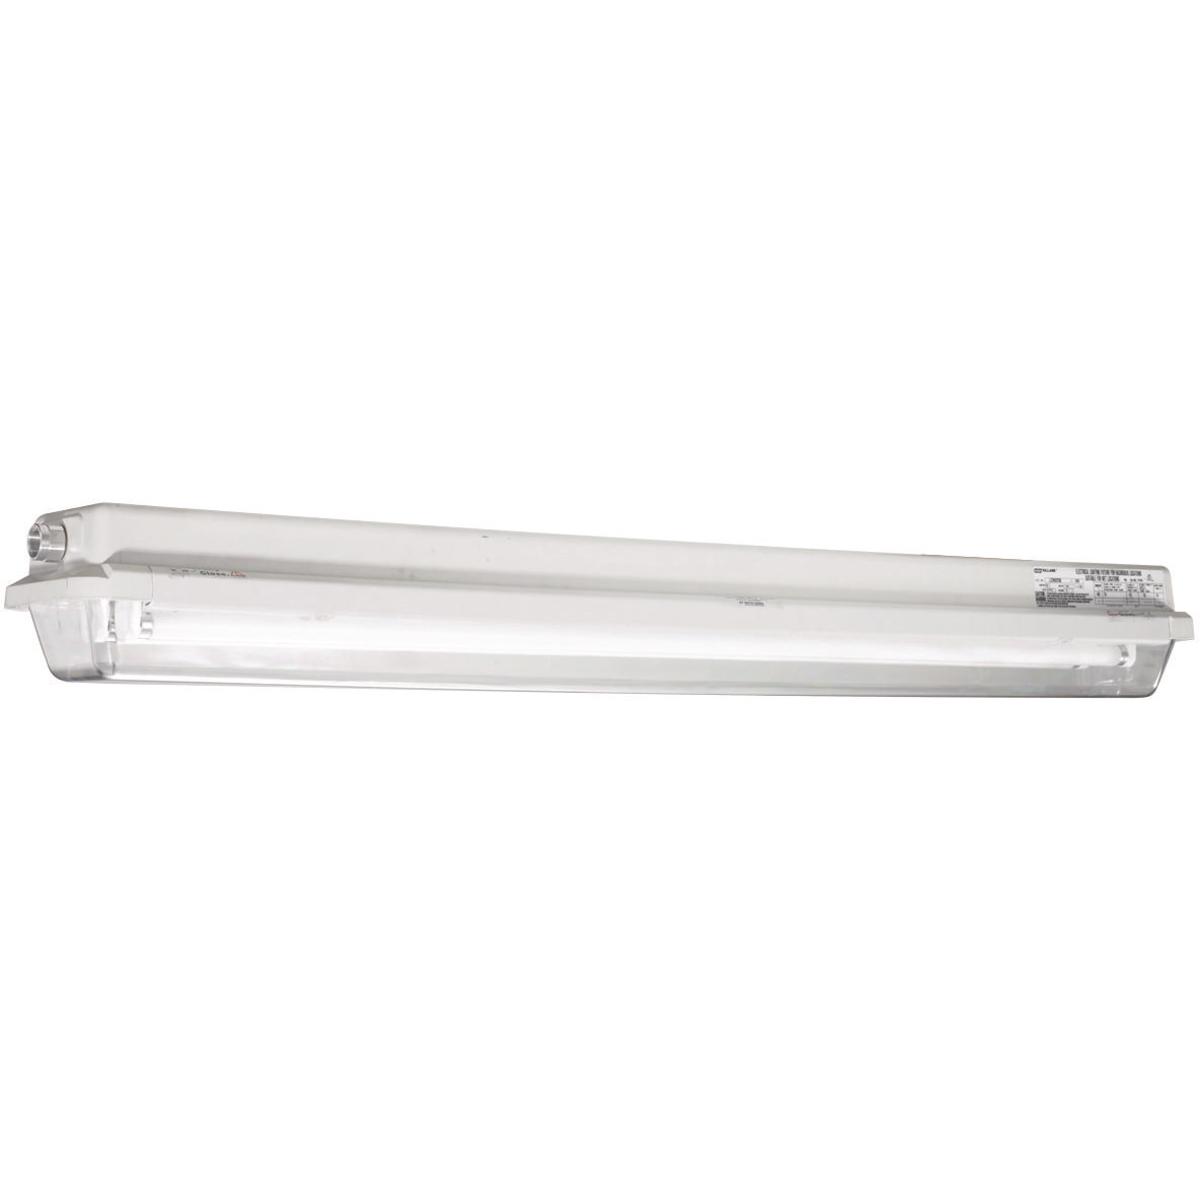 Hubbell LZ2N40204 LZ2N Series- 40W 277V - 4' 2-Lamp T-12 Electronic, Medium Bi-Pin Start 50°F 40W/60°F 34W  ; Lexan® Clear Lens, impact resistant polycarbonate ; Housing-one piece fiberglass reinforced polyester, NEMA 4X & IP66 rated. ; Two 3/4” NTP aluminum hubs - one at 